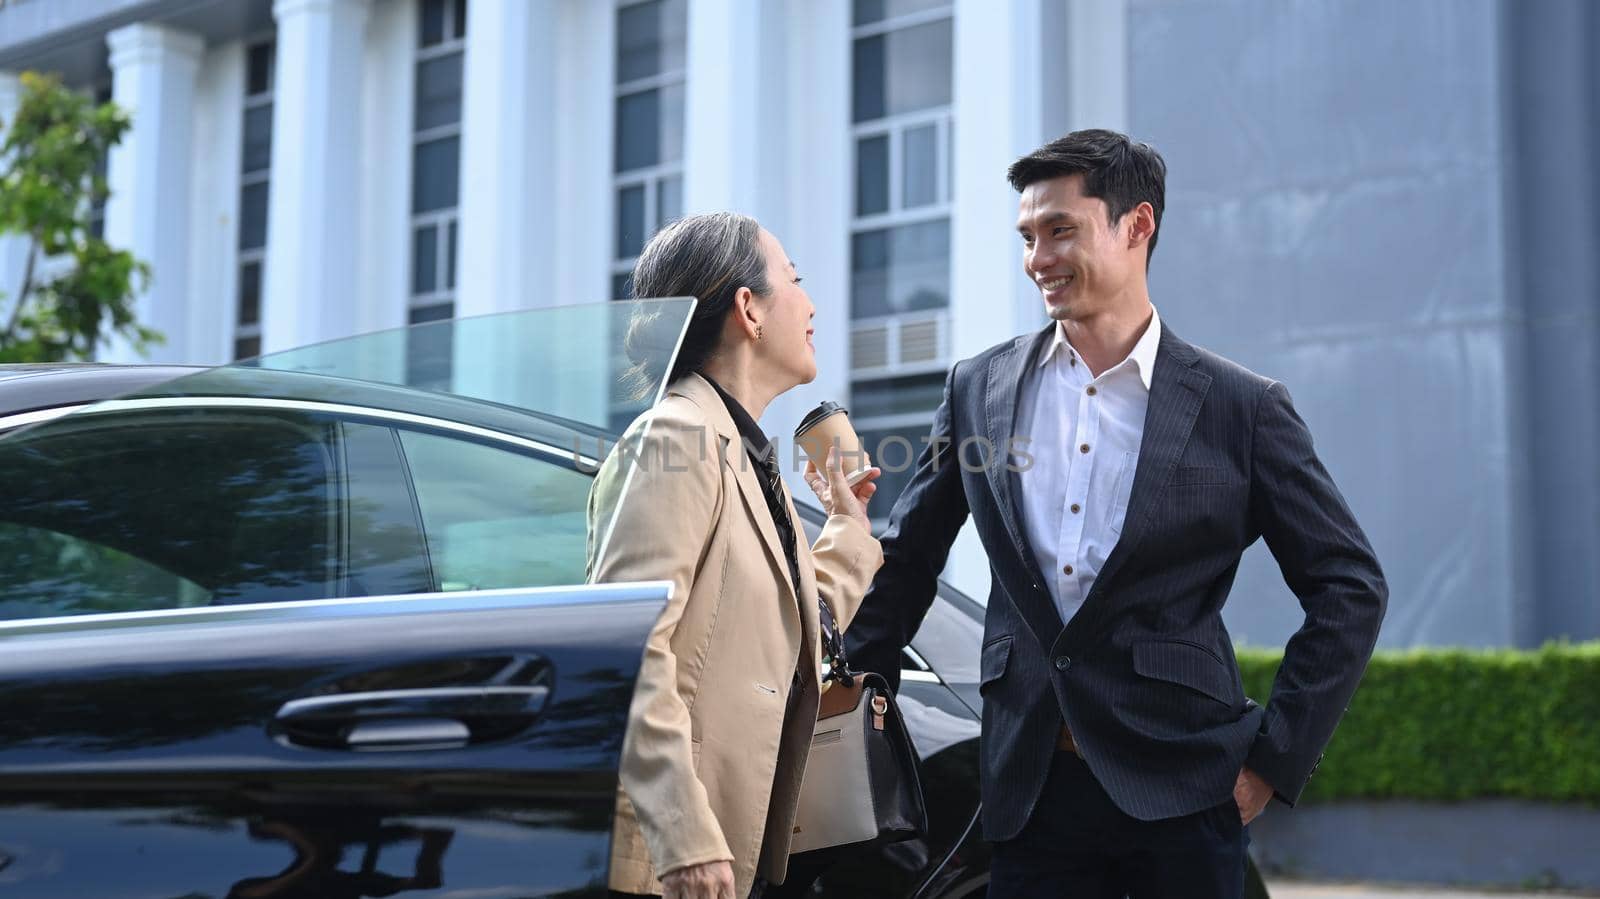 Senior business woman discussing something with young businessman while standing outdoors near a car.